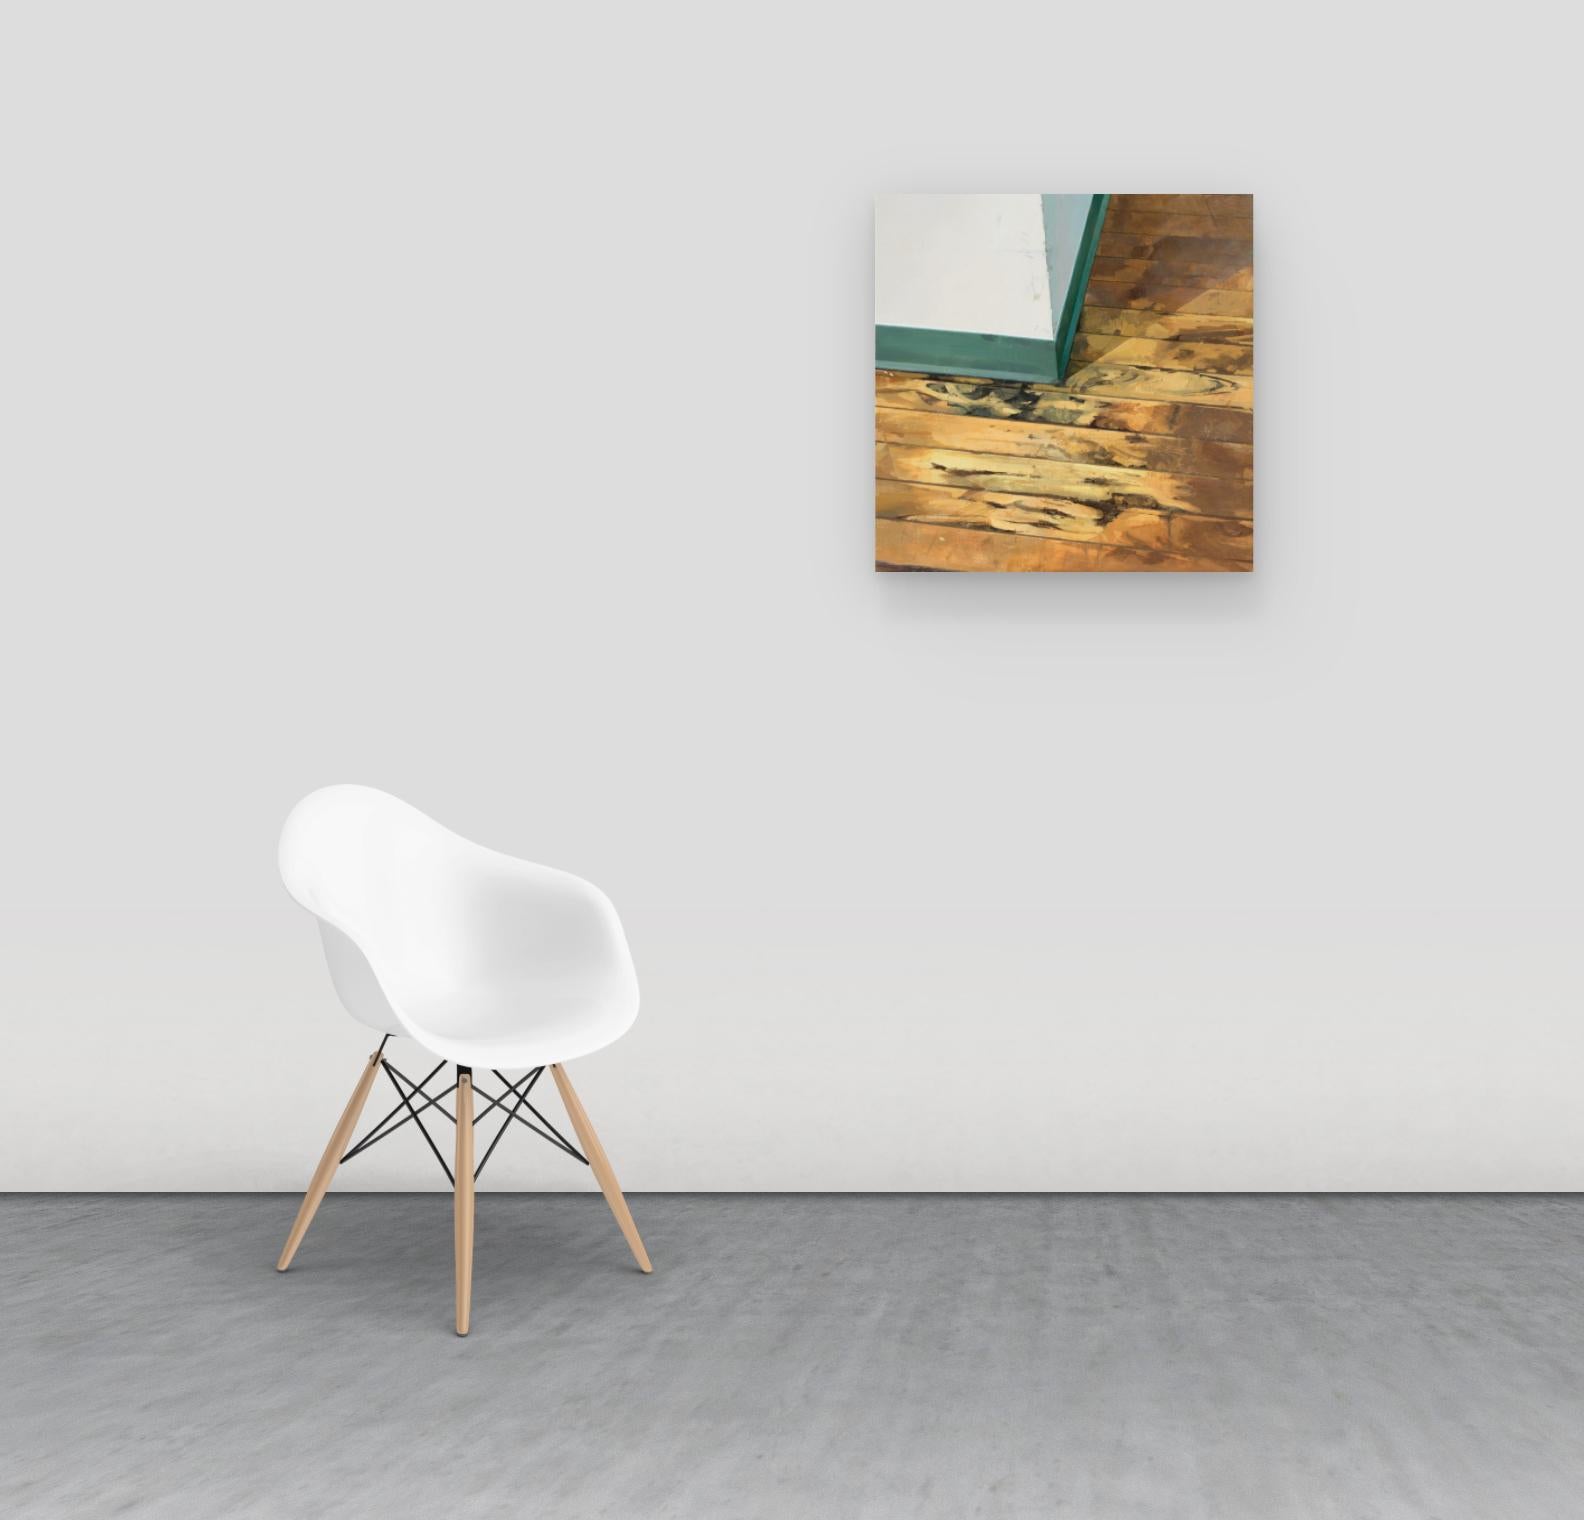 The warmth of a worn, golden brown hardwood floor is unexpectedly dramatic against a stark white wall and teal green baseboard. Signed, dated and titled on verso.

Brett Eberhardt’s painted interiors are inhabited by singular objects, and are vacant